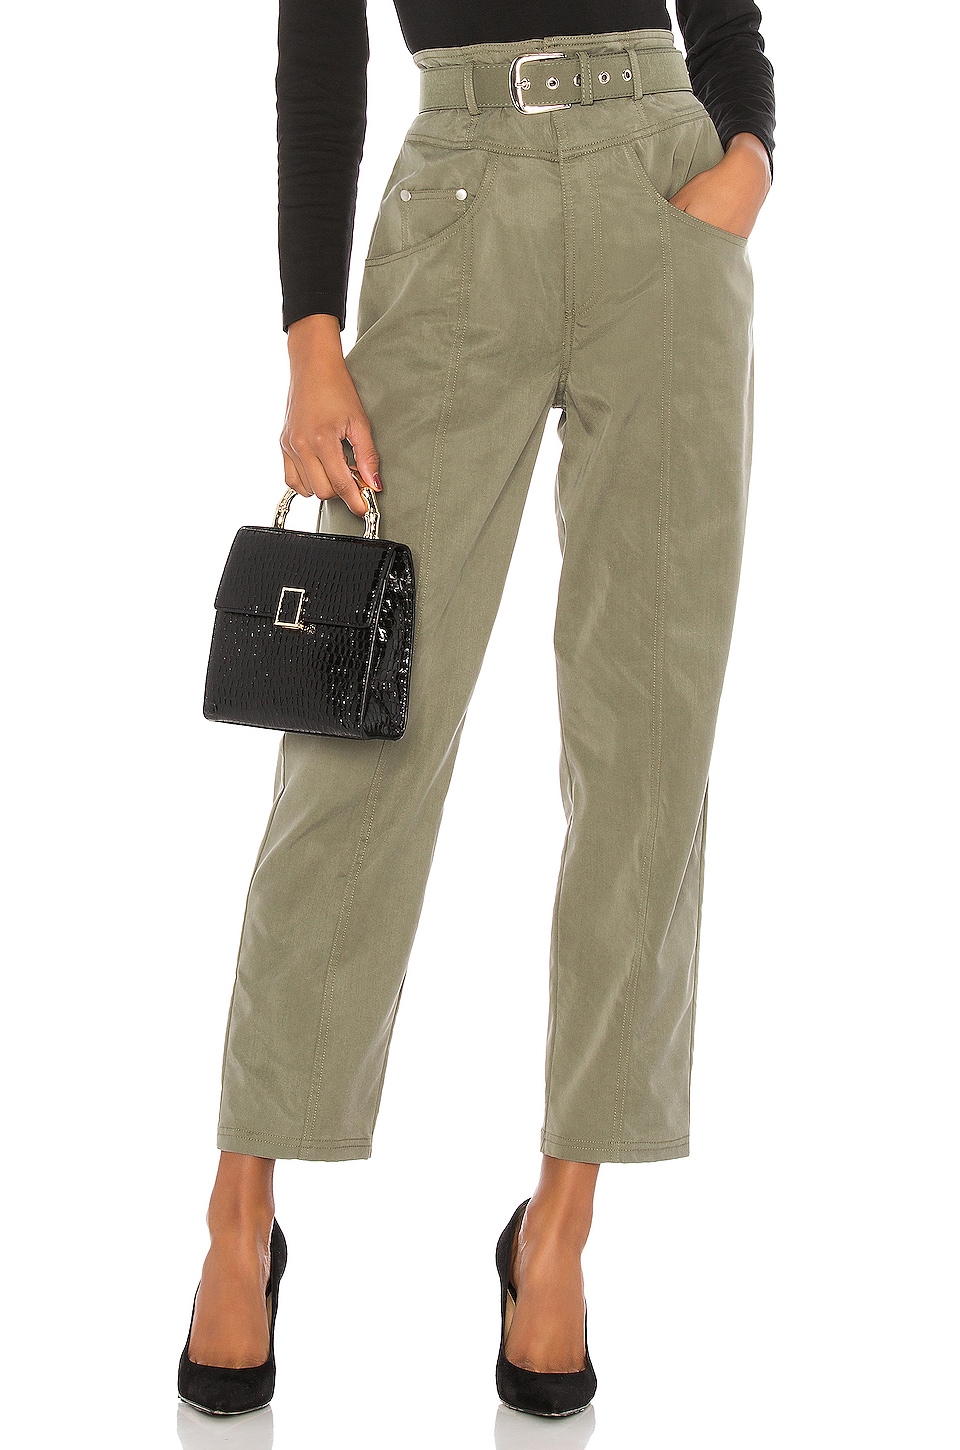 L'Academie The Lisa Pant in Olive Green | REVOLVE